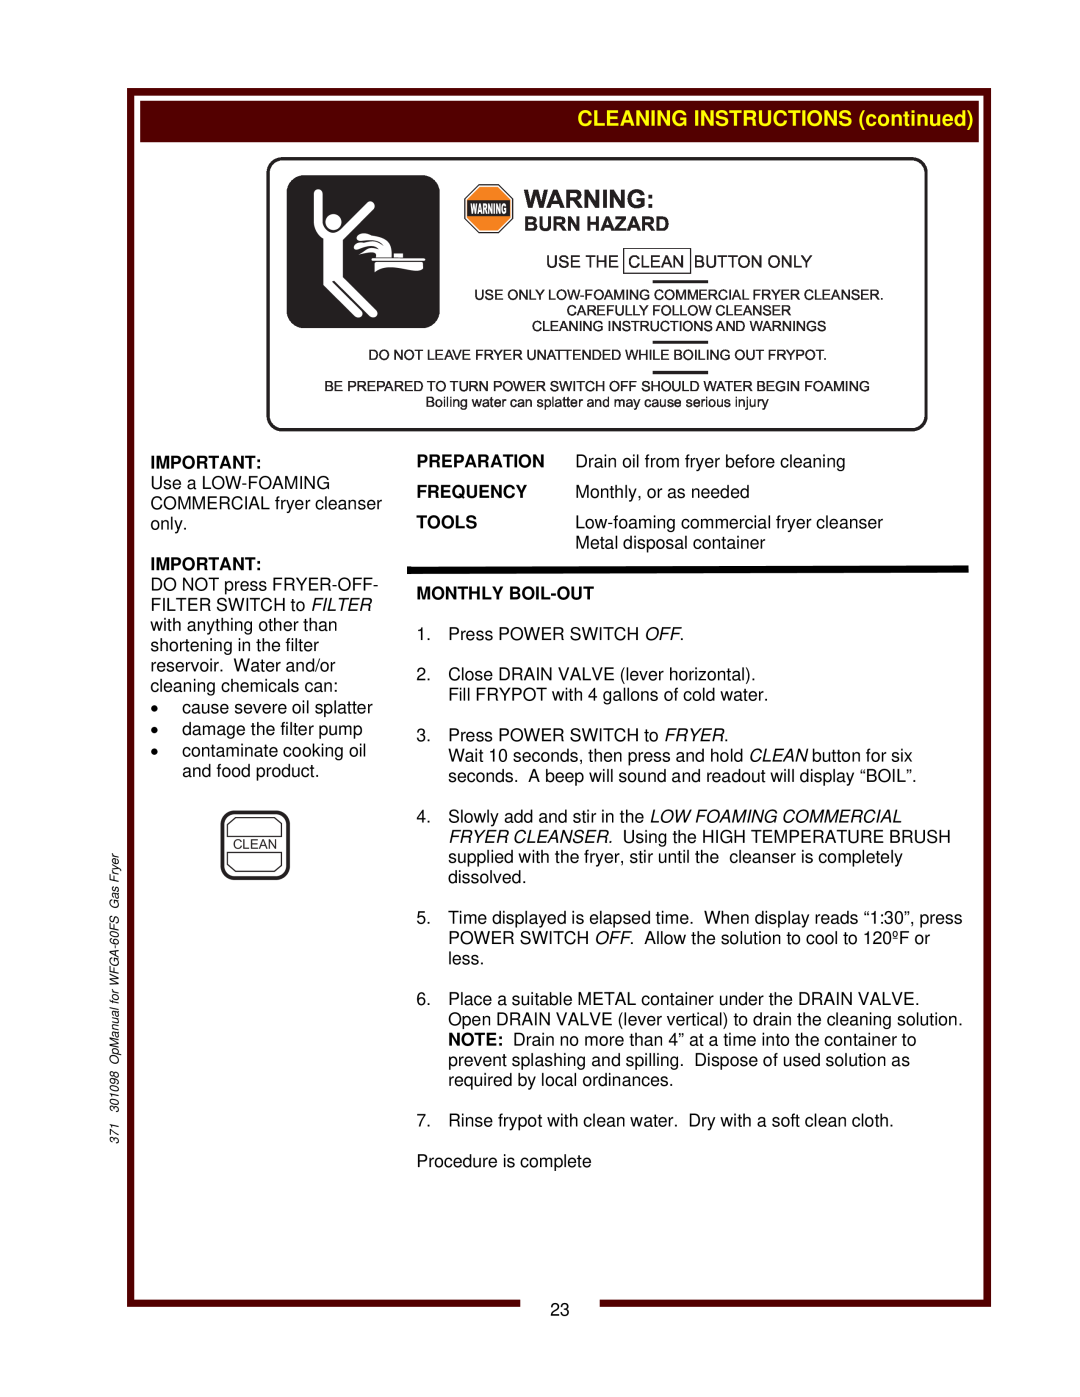 Wells WFGA-60FS CLEANING INSTRUCTIONS continued, Burn Hazard, Use The Clean Button Only, Monthly Boil-Out, Warning Warning 